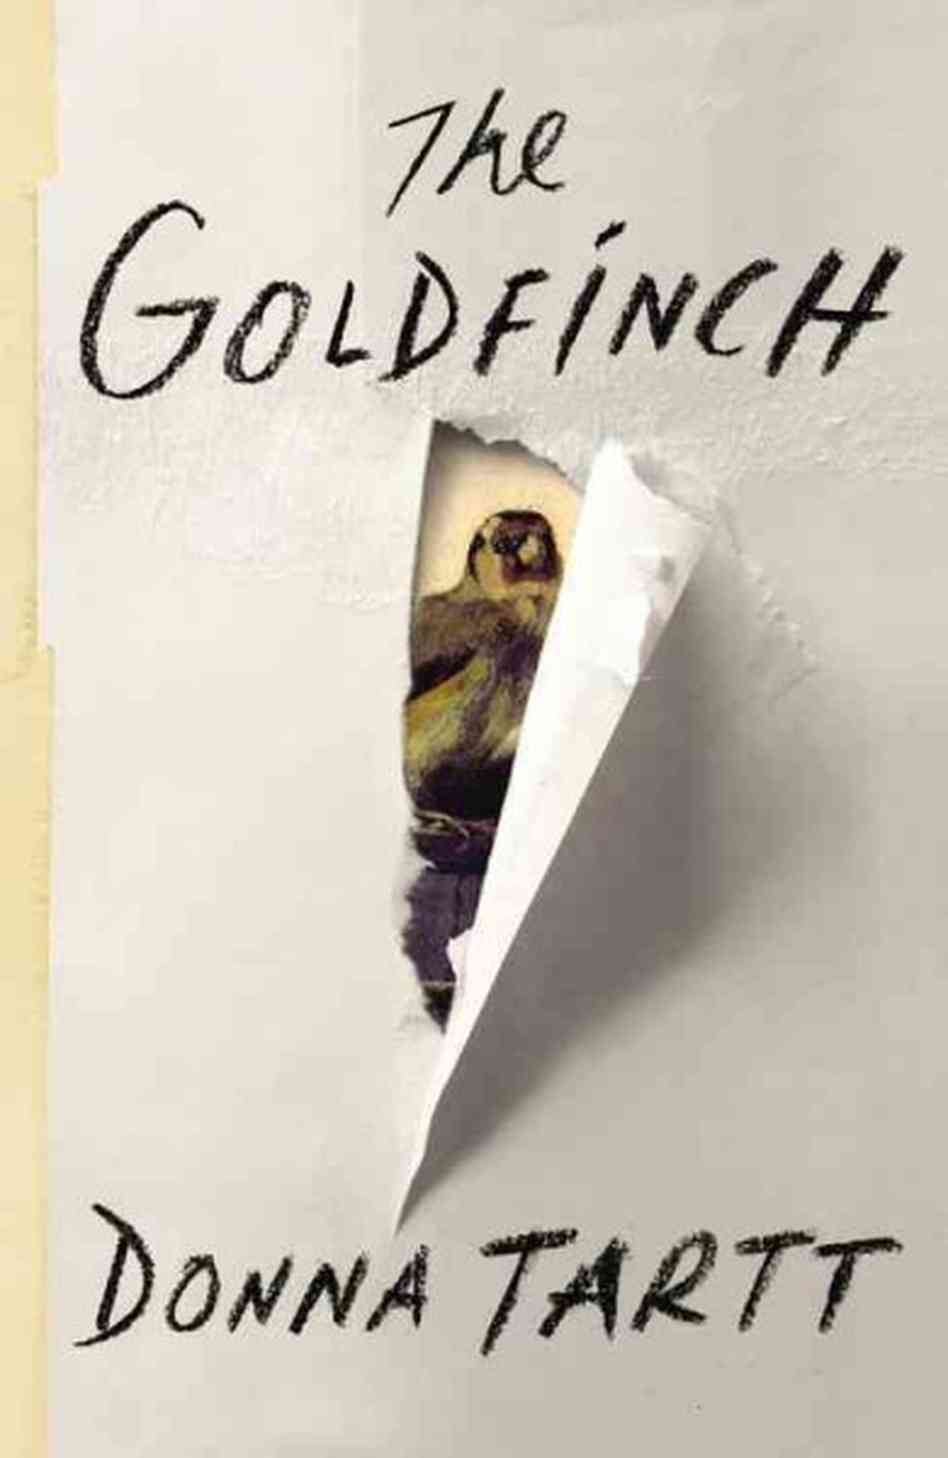 Brett Ratner and Warner Bros bought the film rights to Donna Tartt's The Goldfinch.